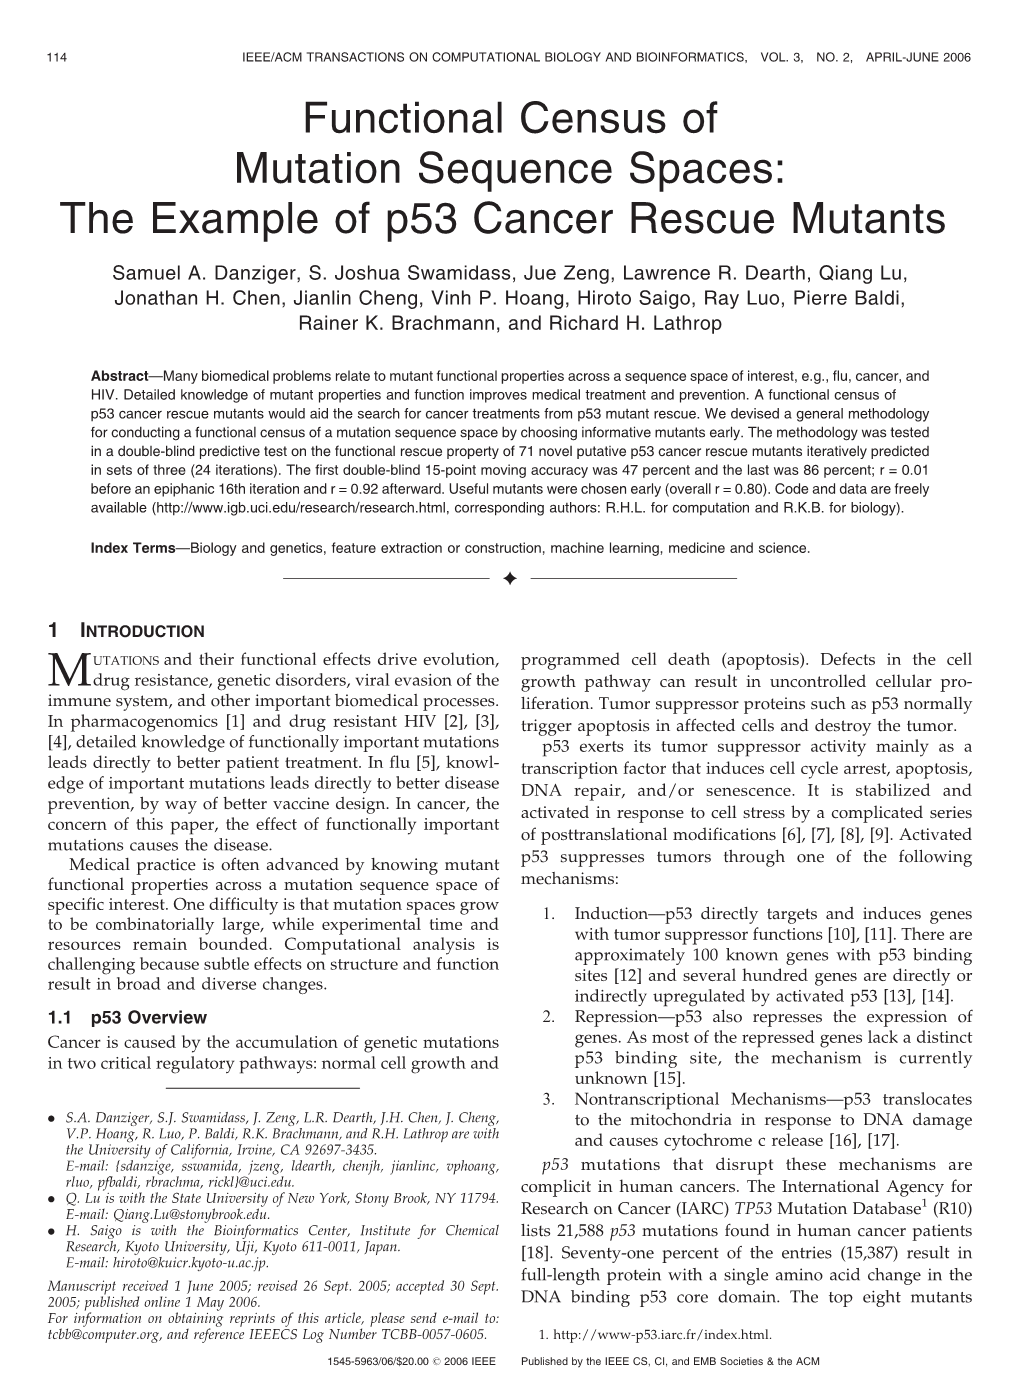 The Example of P53 Cancer Rescue Mutants